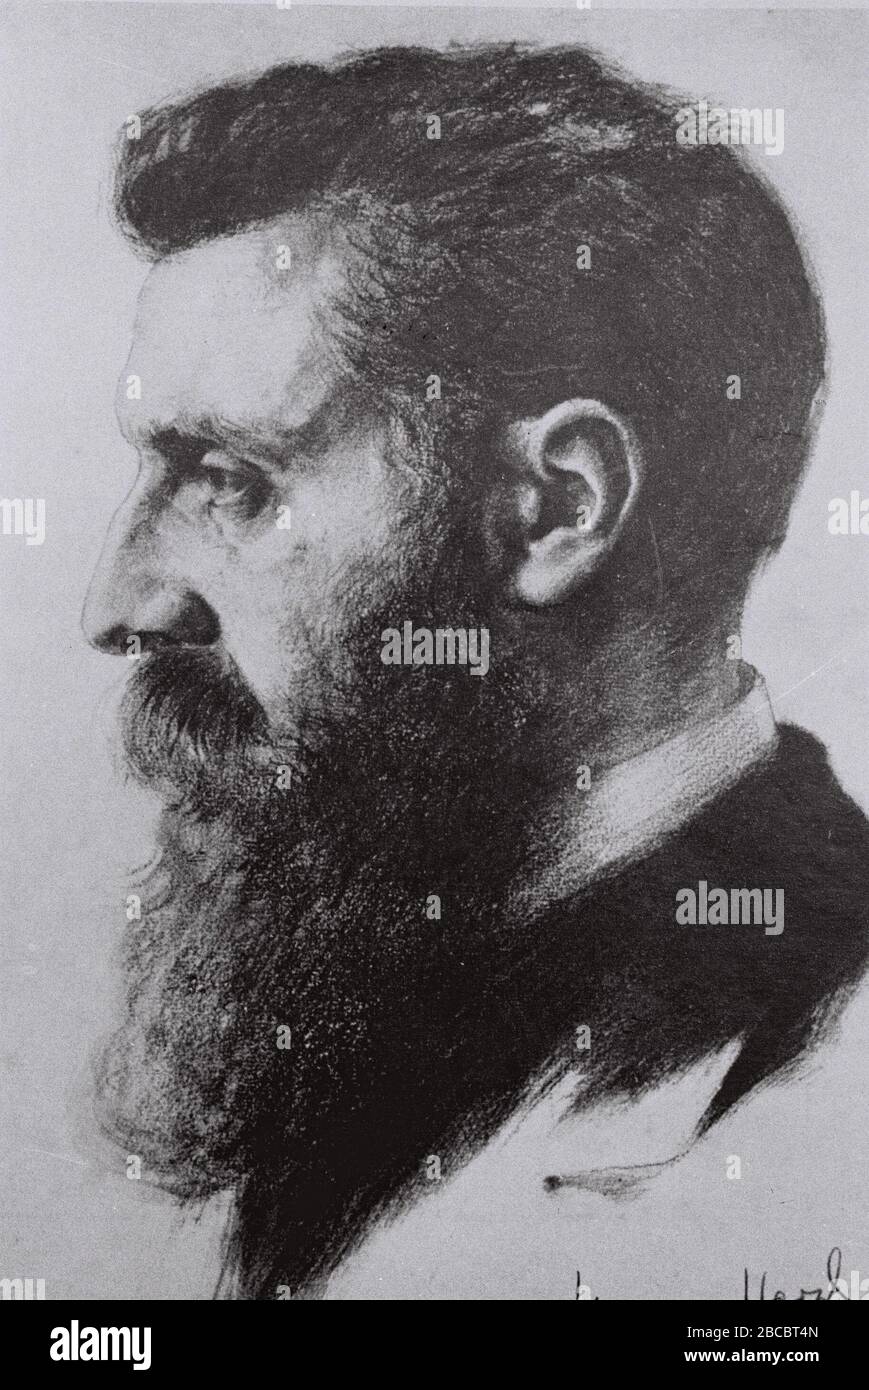 English A Sketch Of The Late Dr Theodor Herzl O I I O O C U O I N I U I O I O I I I O U E I I I N E E I U 1 January 1901 This Is Available From National Photo Collection Of